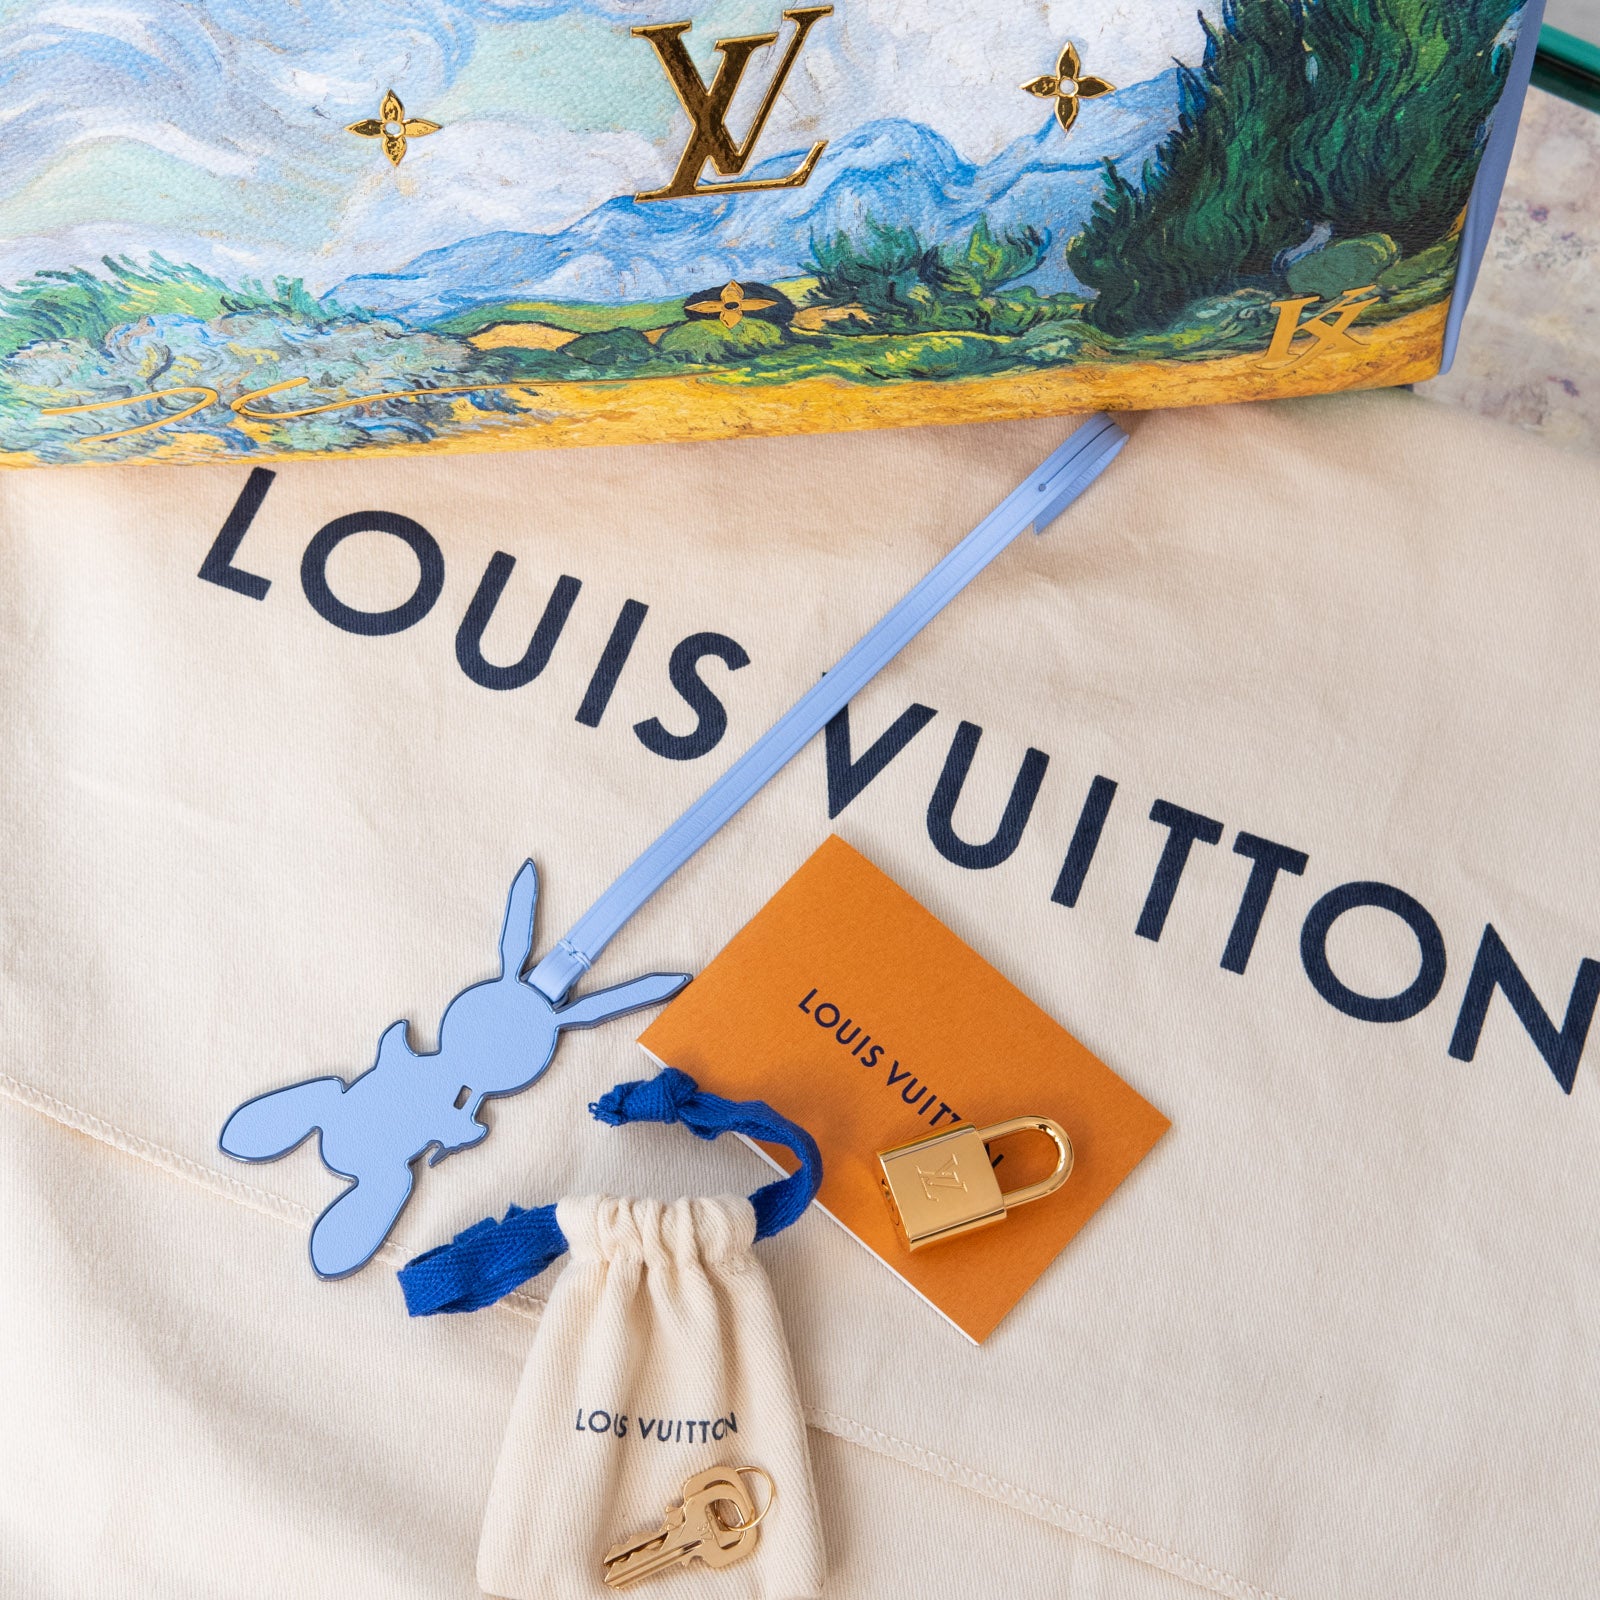 Louis Vuitton Limited Edition Lavender Speedy 30 Jeff Koons Van Gogh Masters Collection - Image 18 of 18